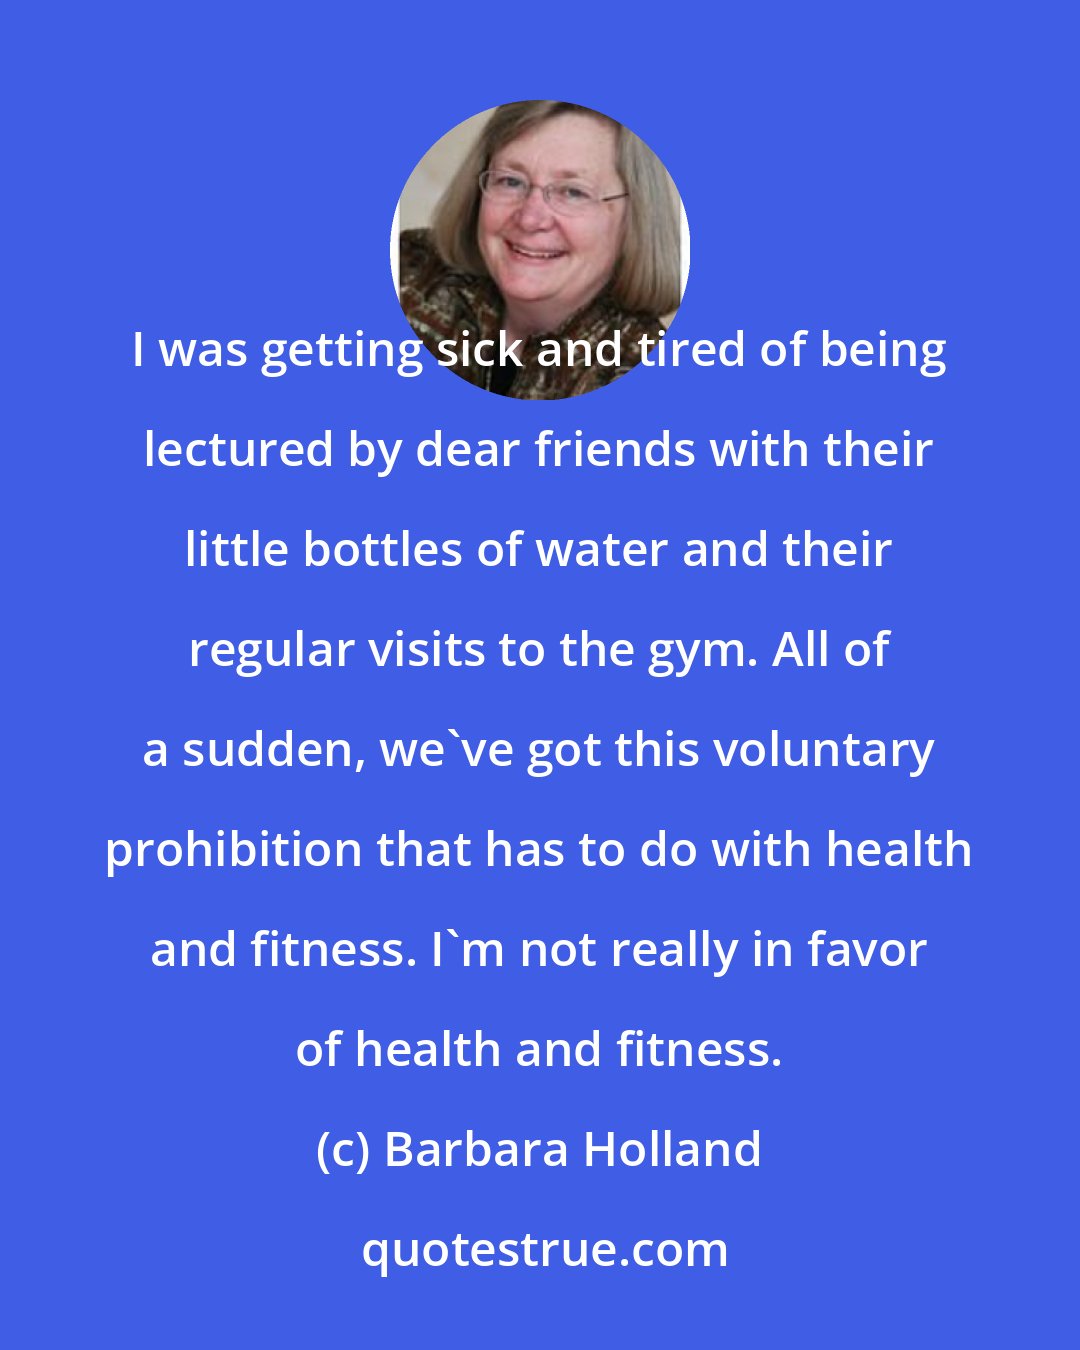 Barbara Holland: I was getting sick and tired of being lectured by dear friends with their little bottles of water and their regular visits to the gym. All of a sudden, we've got this voluntary prohibition that has to do with health and fitness. I'm not really in favor of health and fitness.